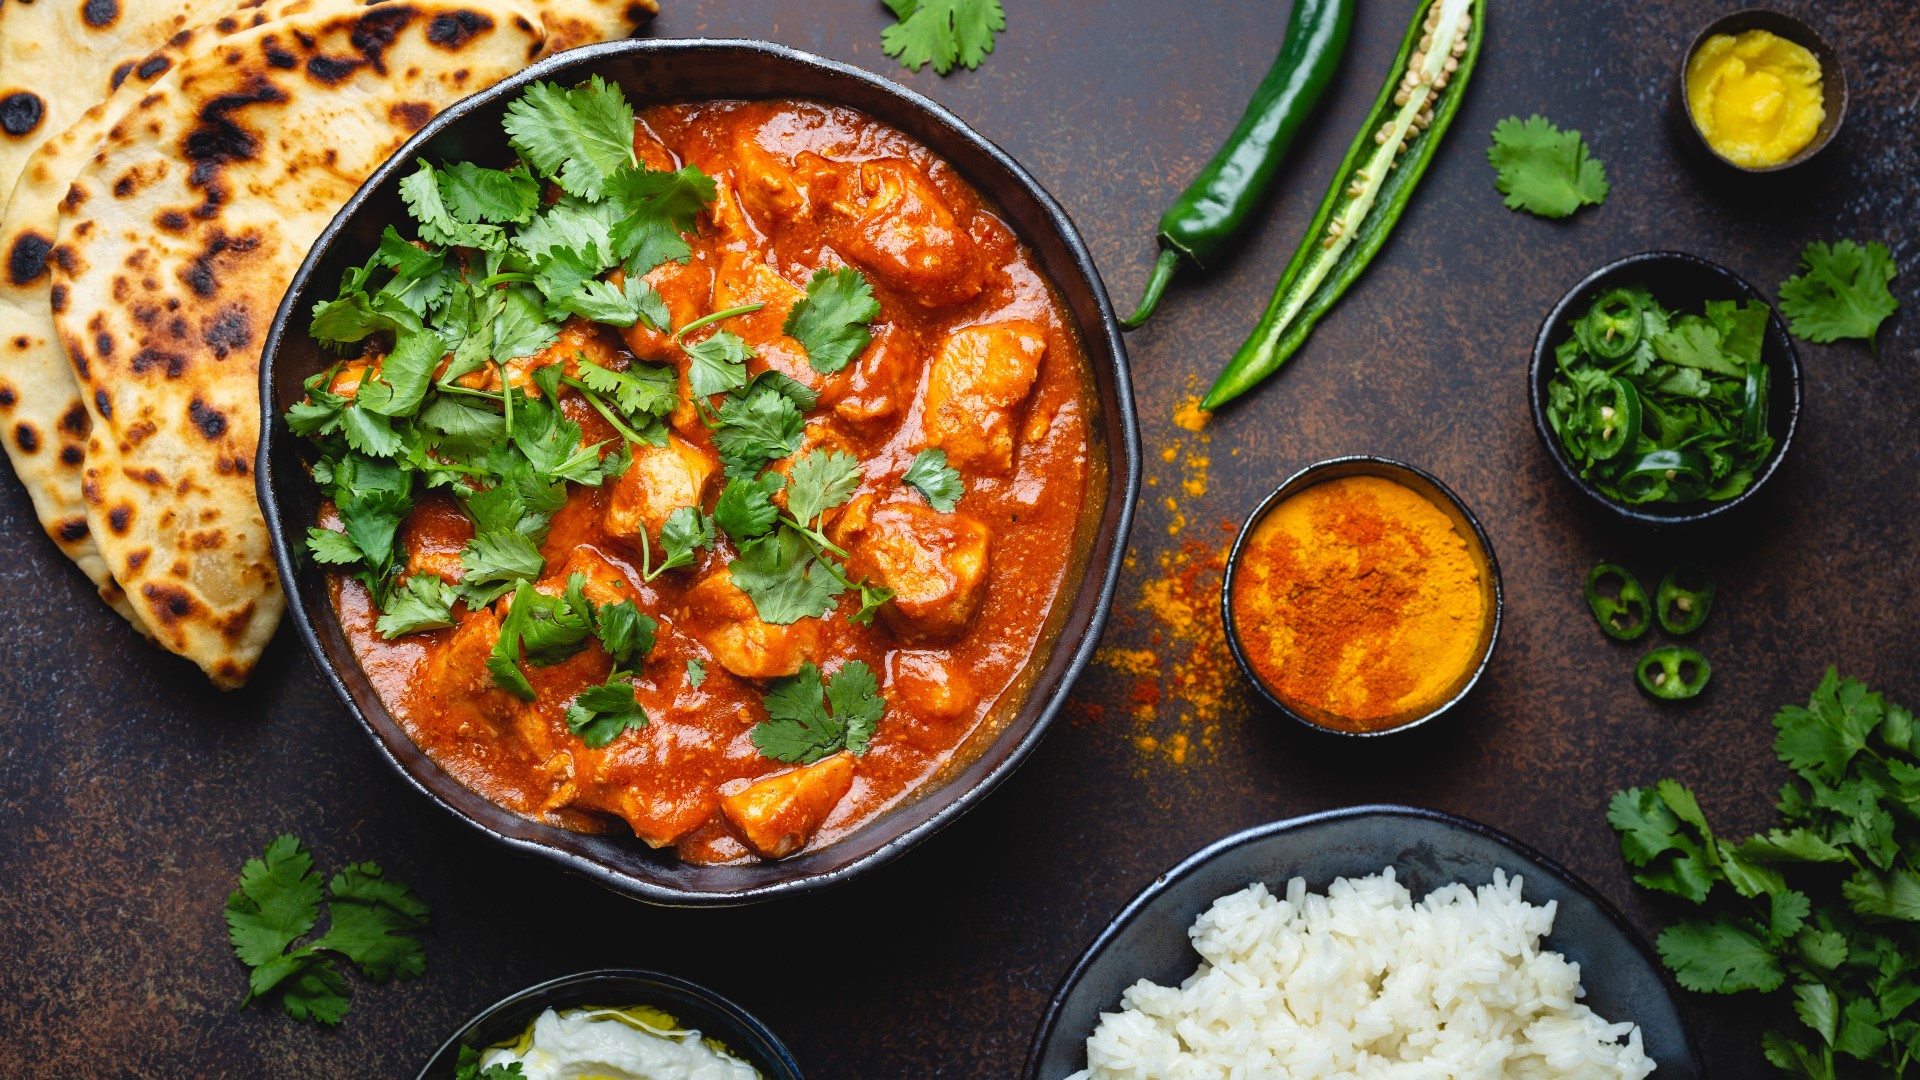 Learn how to cook curry with Bollywood Bistro's executive chef Sunil Bastola.